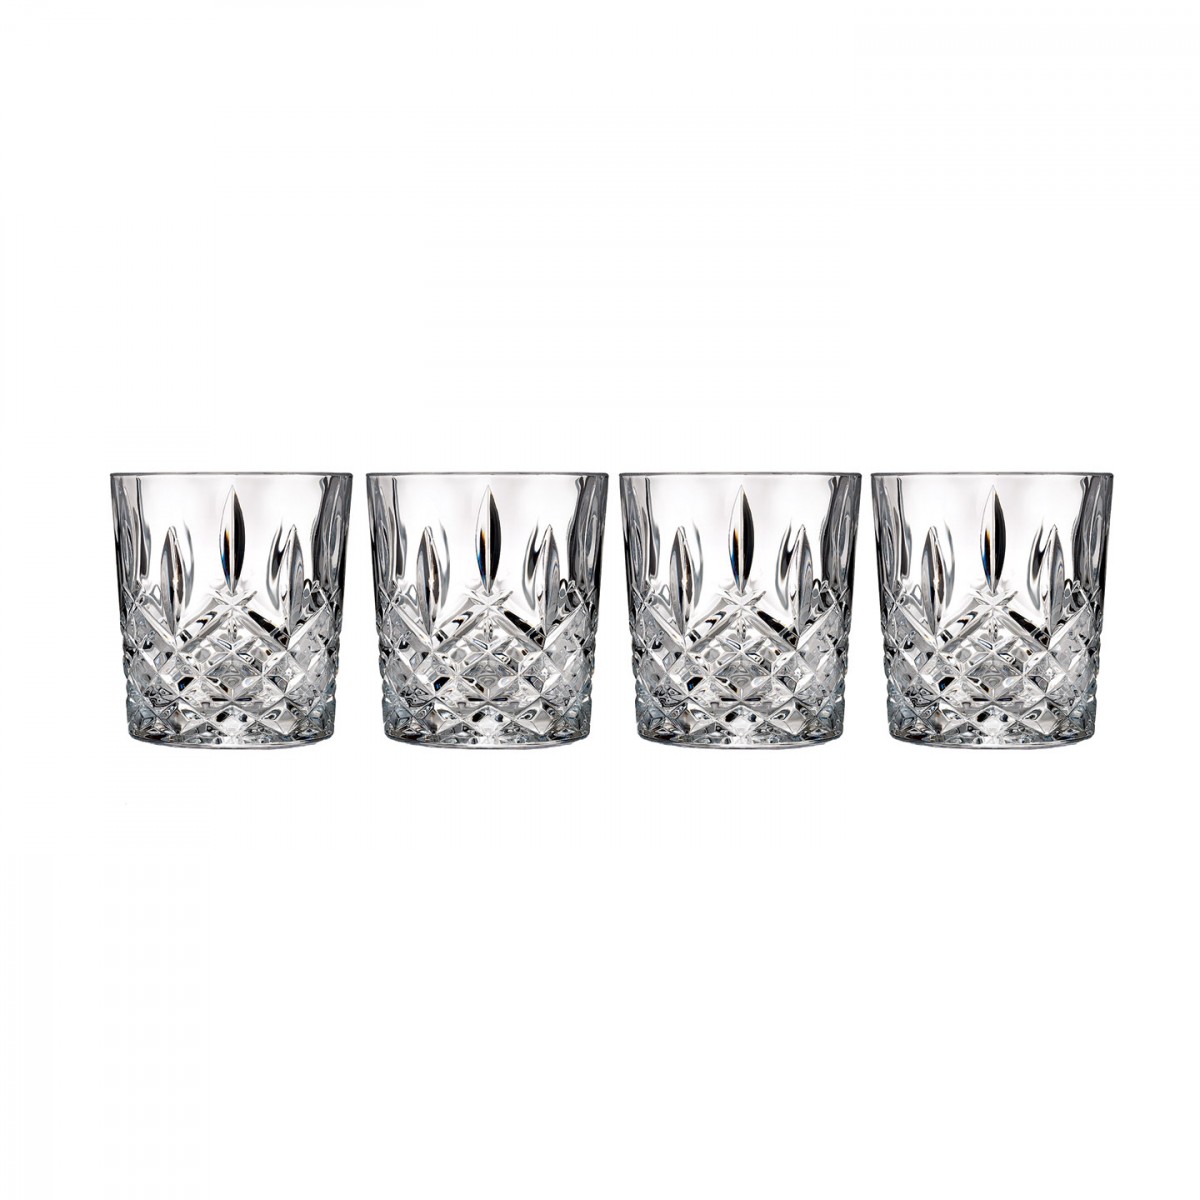 Marquis by Waterford Markham DOF Whiskey Tumbler, Set of 4